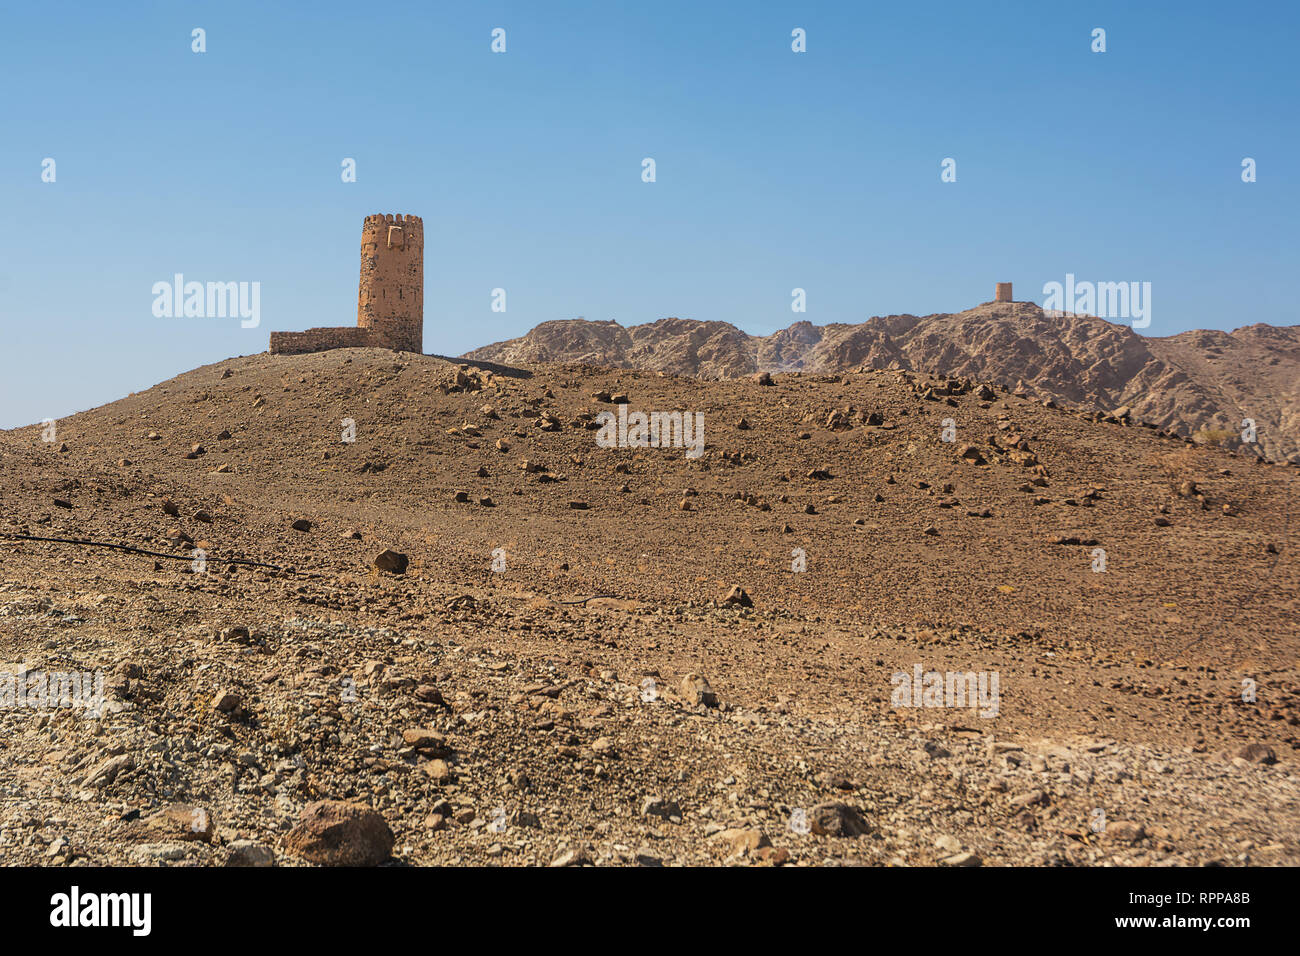 Ancient tower on top of a rocky hill in Oman Stock Photo